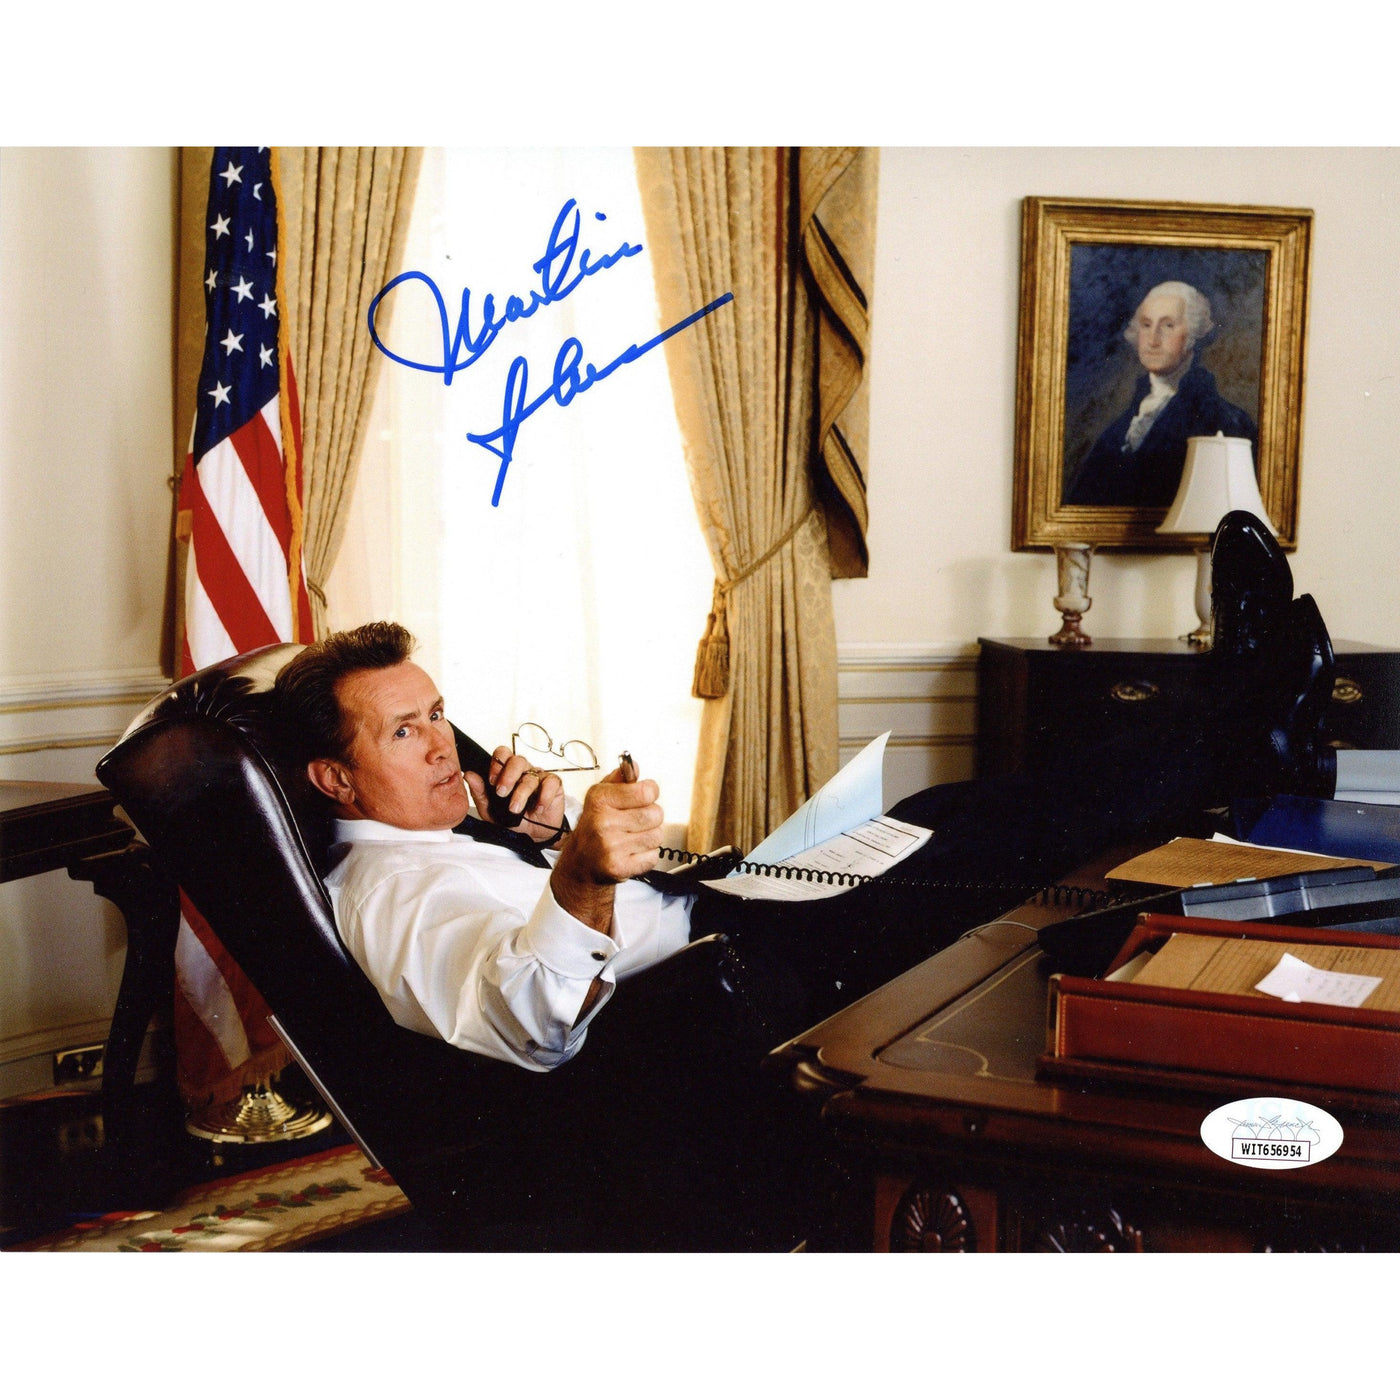 Martin Sheen Autographed 8x10 Photo The West Wing Signed JSA COA